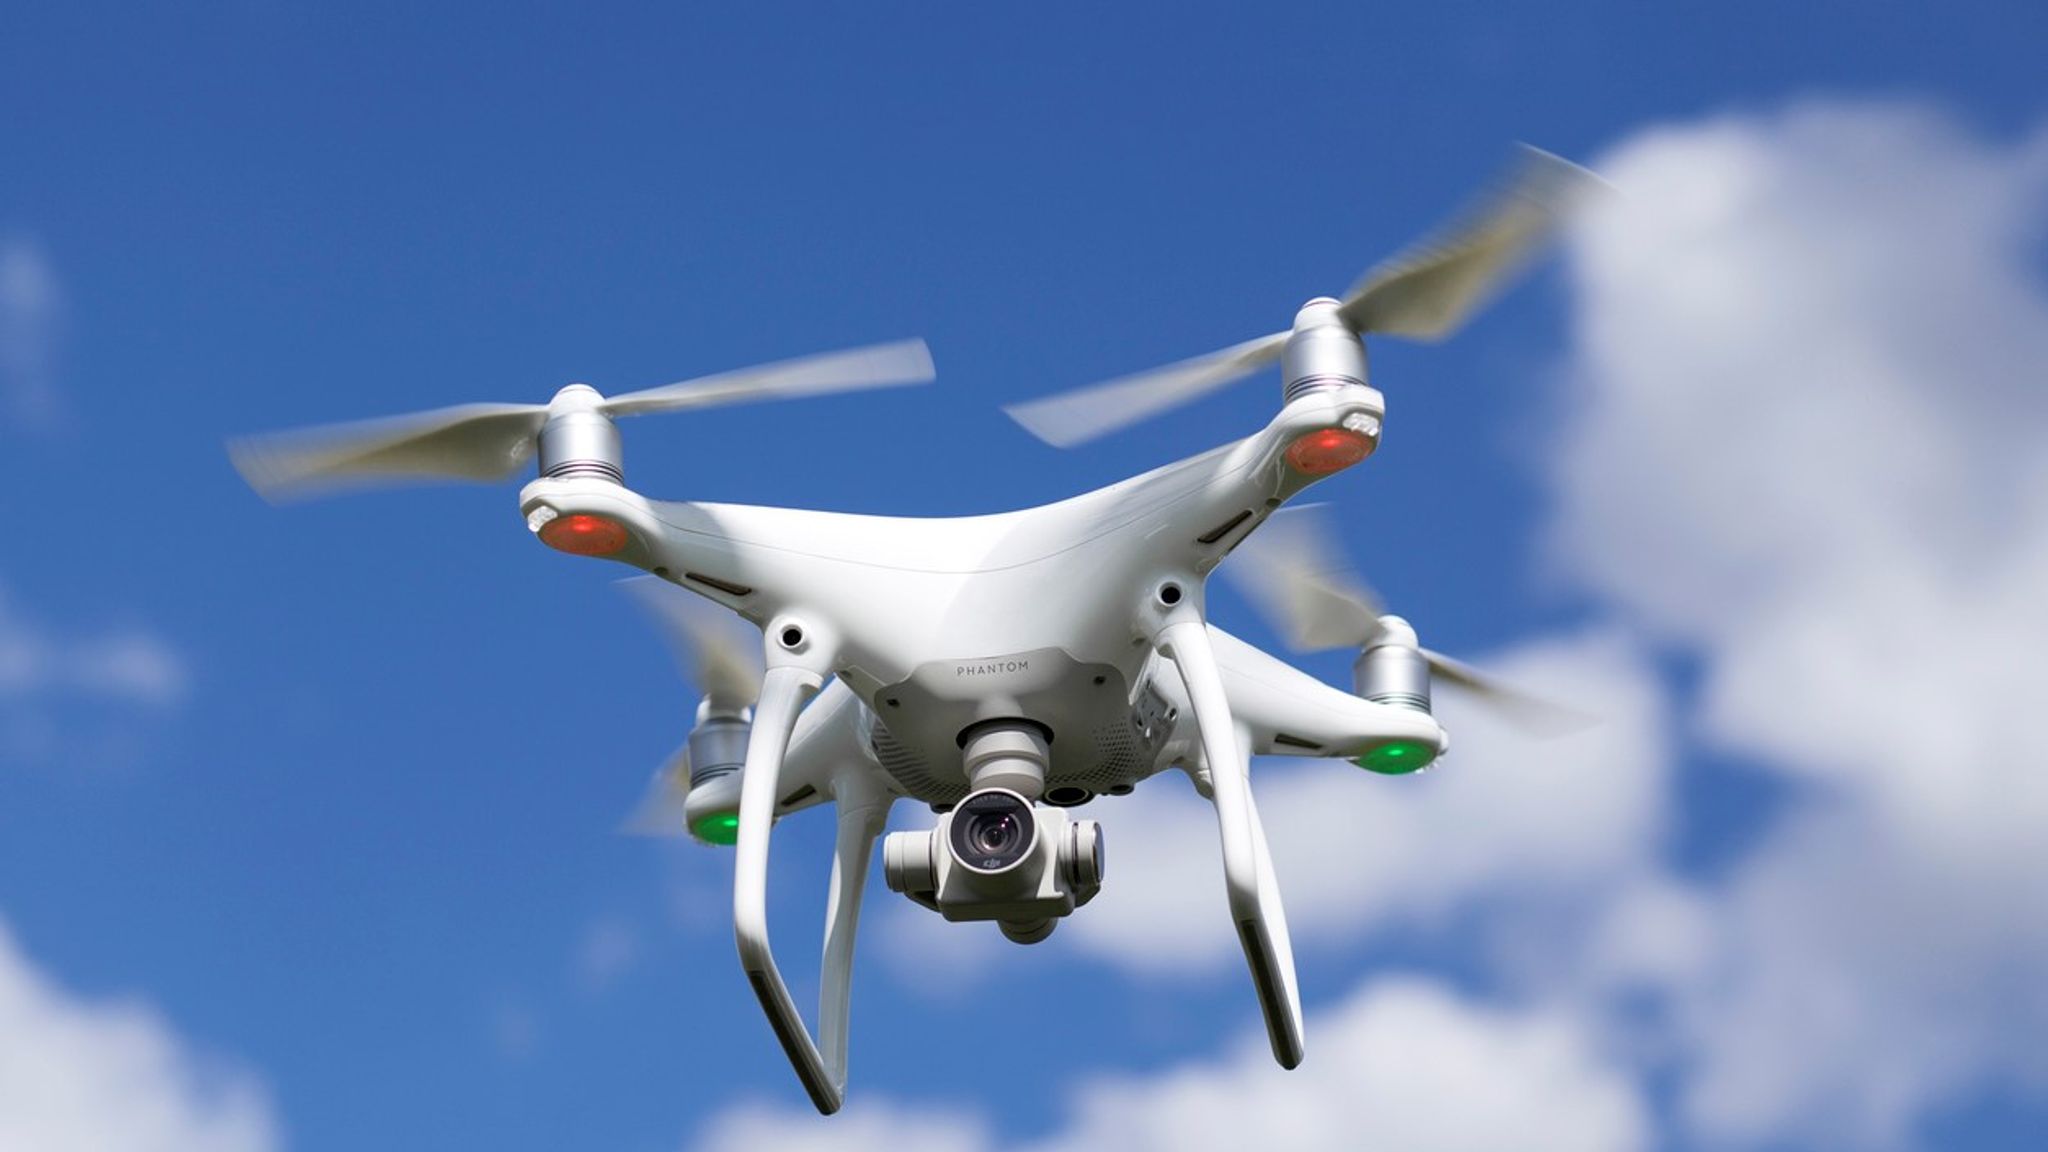 How much does a drone costs in Kenya?